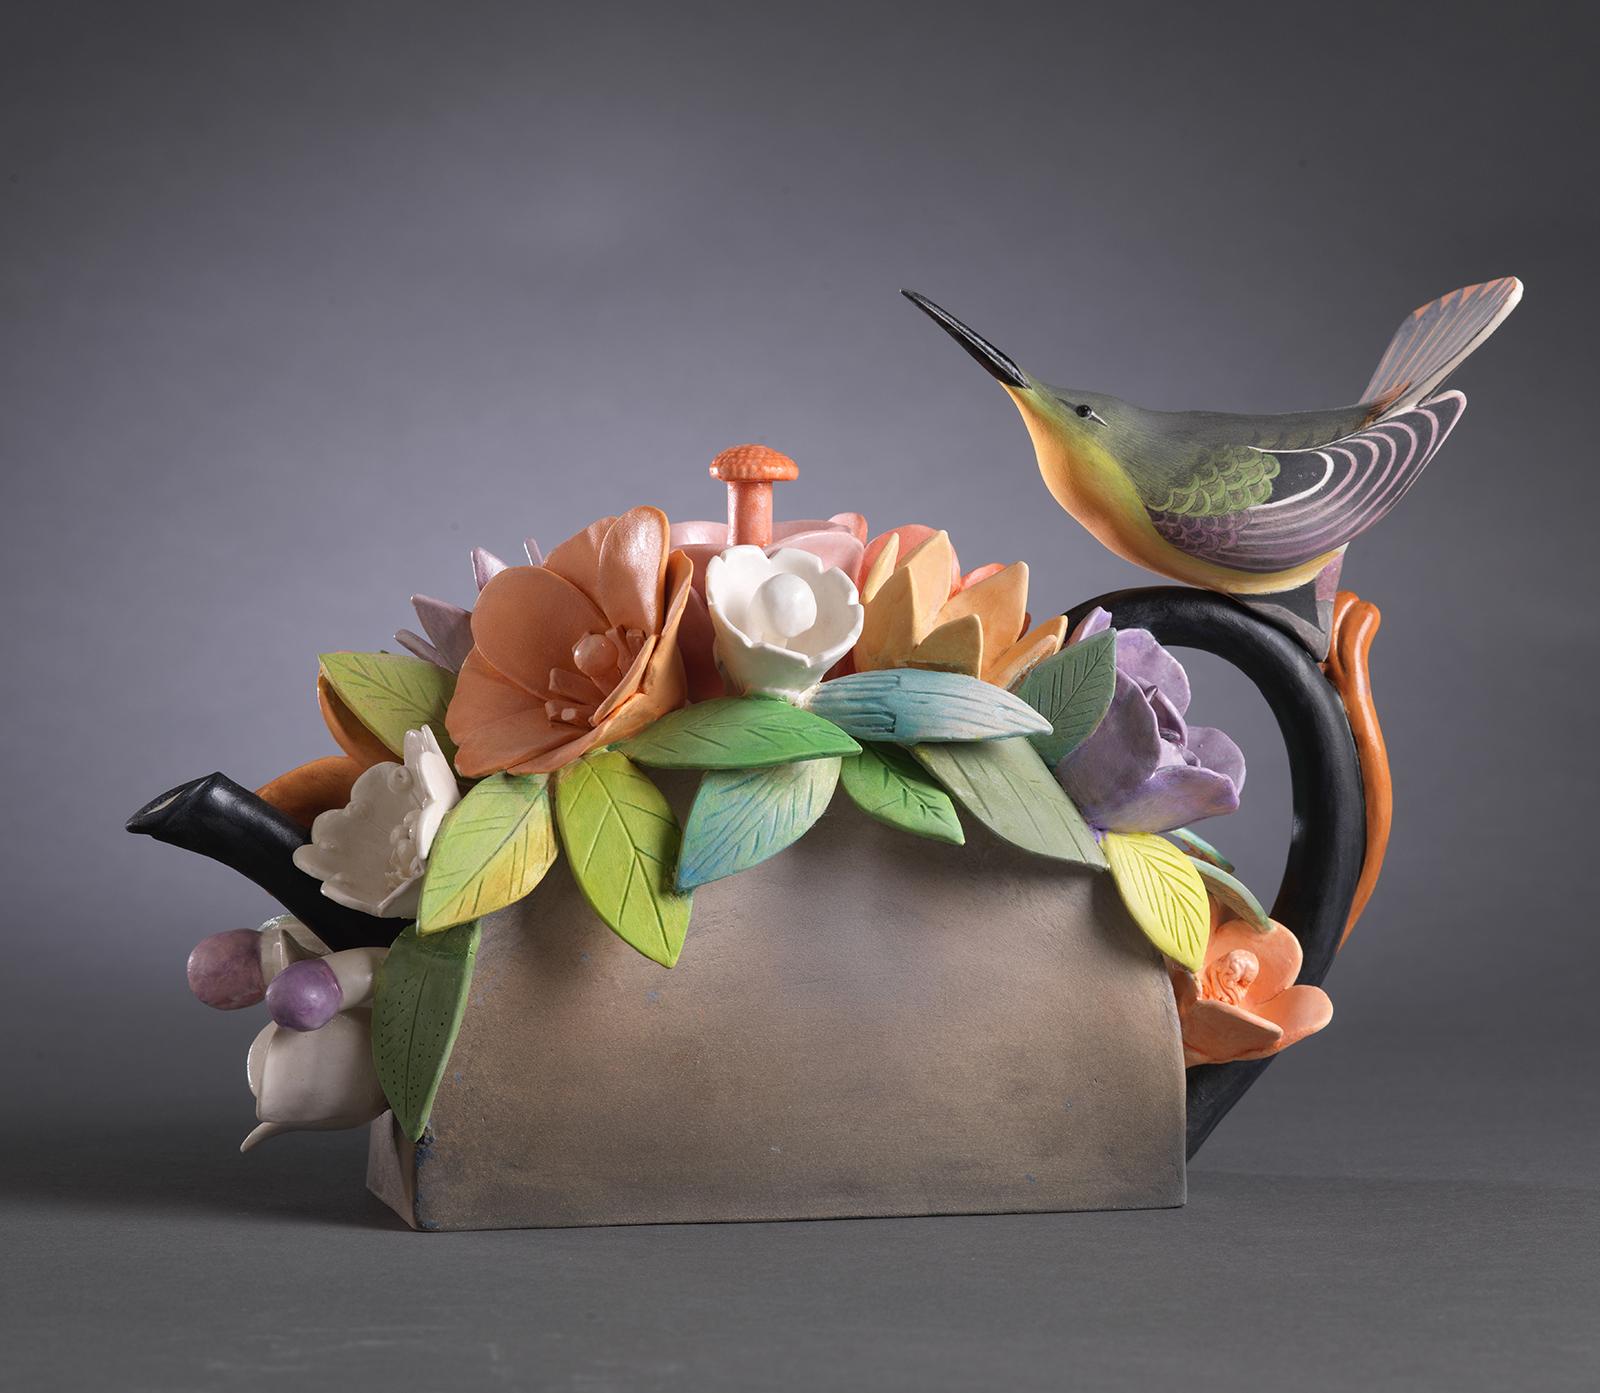 Hummingbird with Flowers Teapot - Sculpture by Annette Corcoran